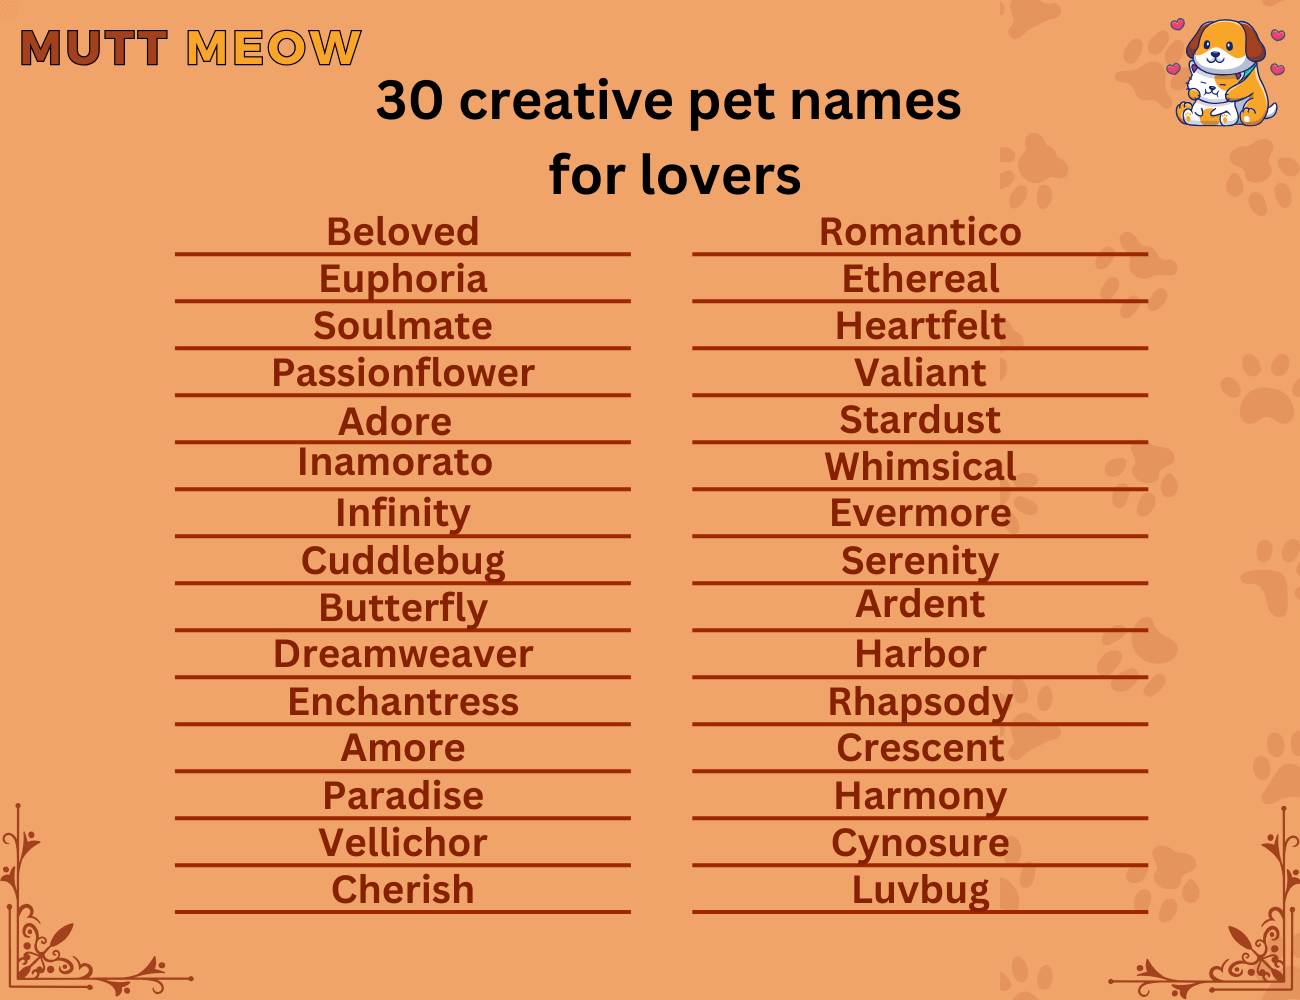 30 creative pet names for lovers